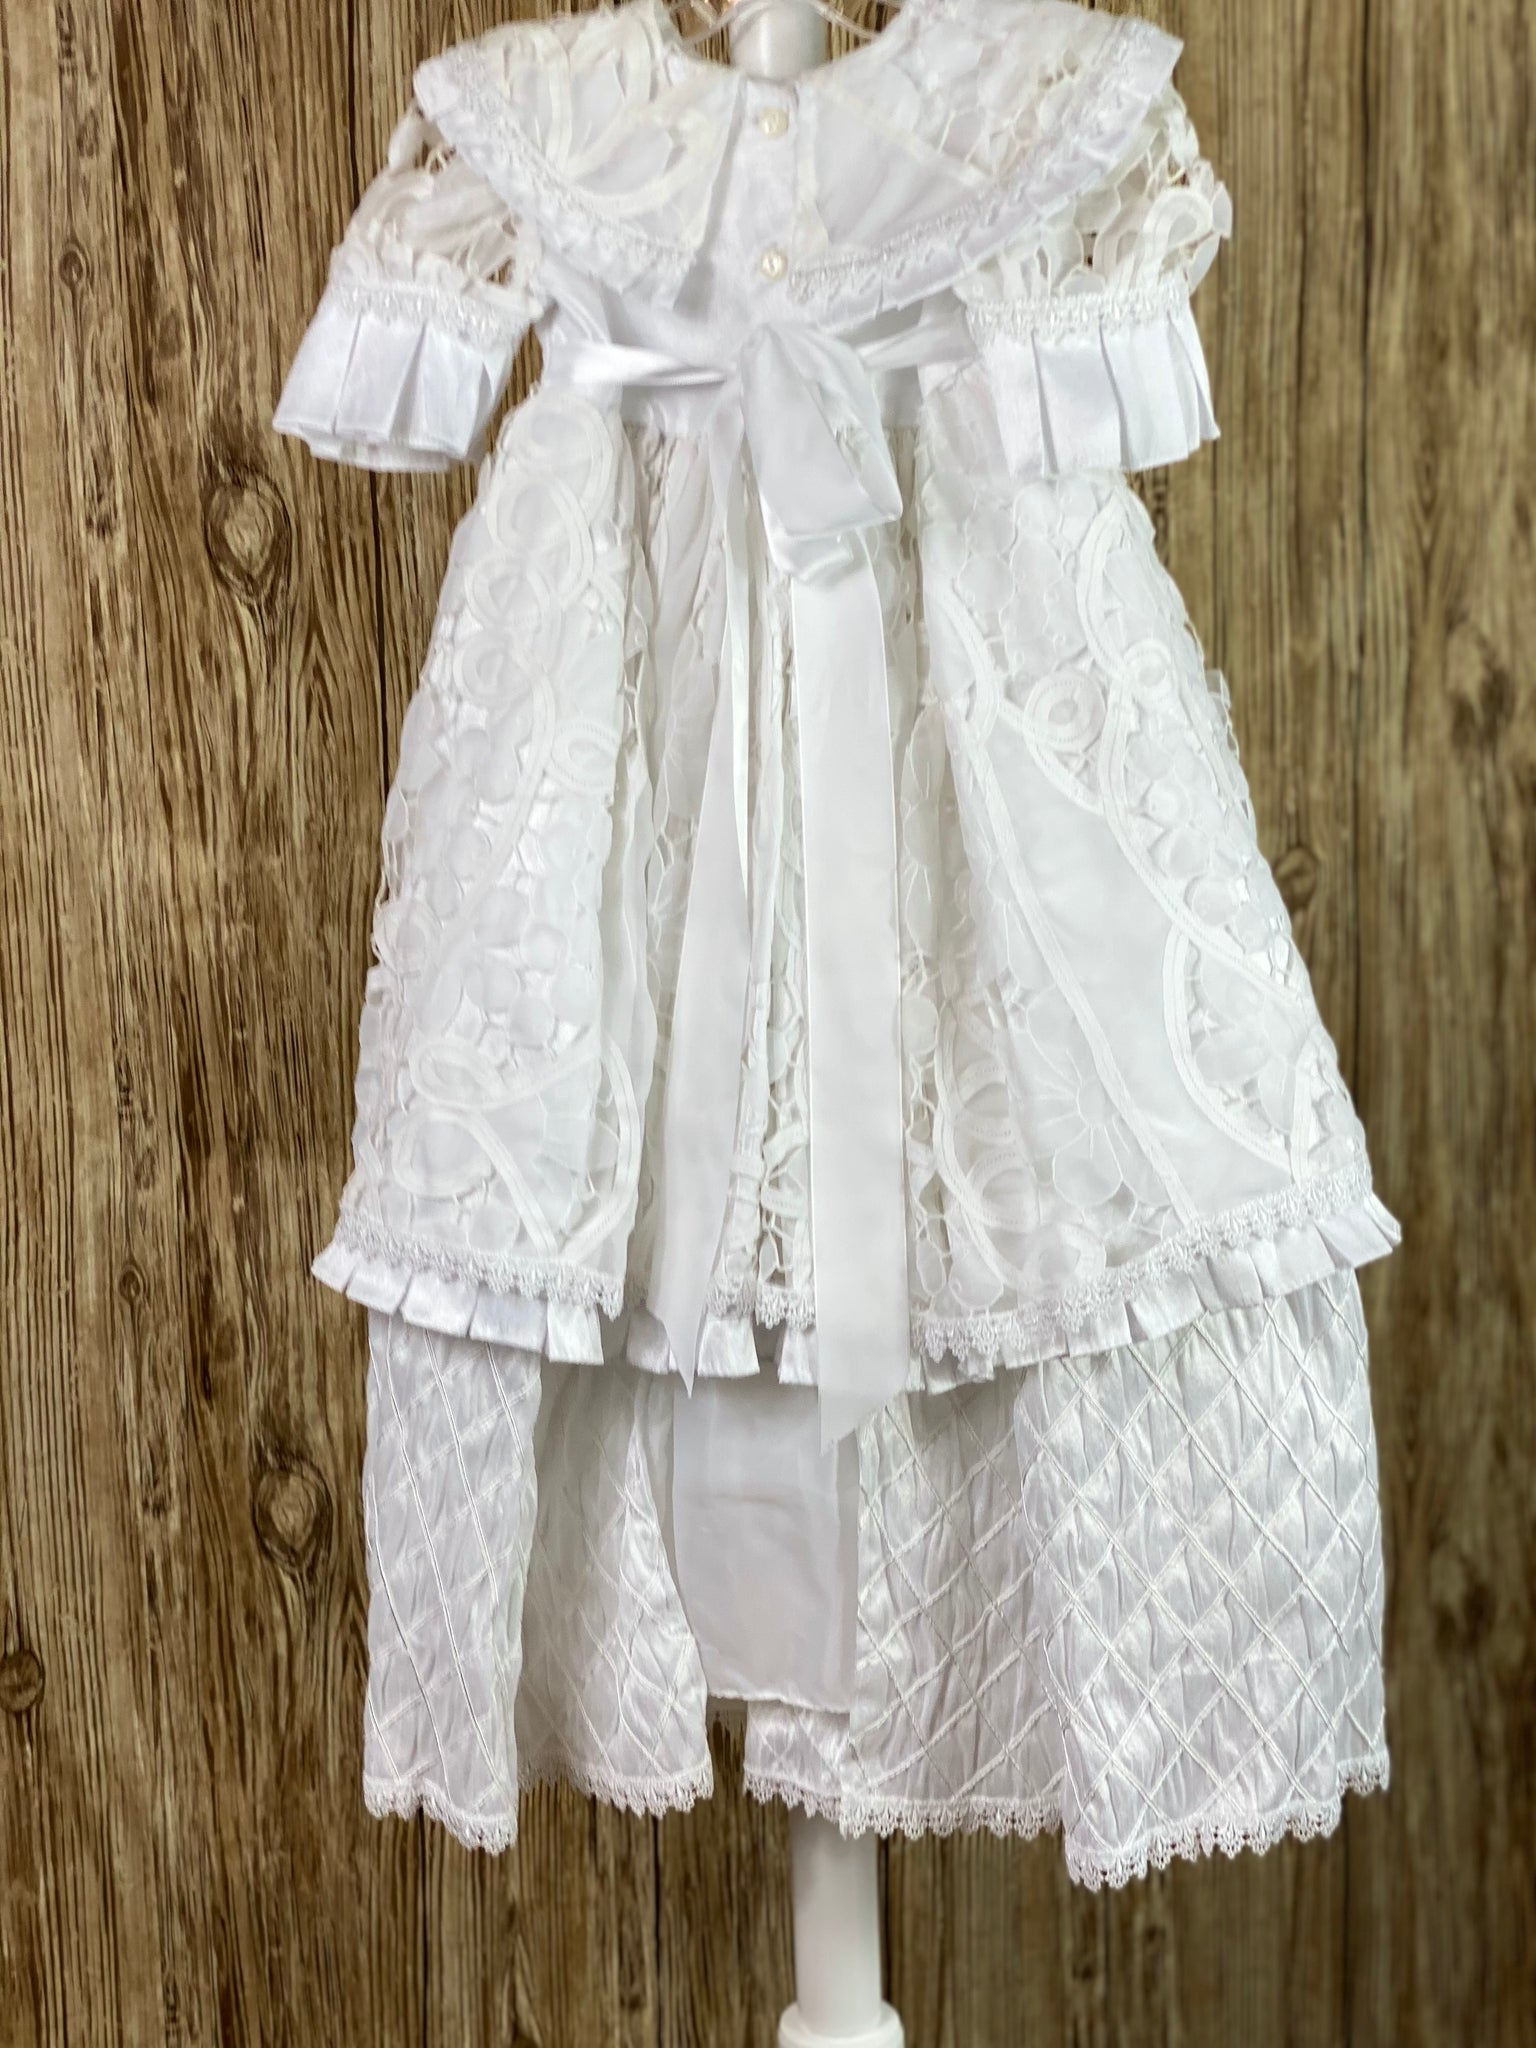 This a beautiful, one-of-a-kind baptism gown.  A lovely gown for a precious child.  White, size 12M Double layer dress Satin bodice with rounder lace collar Lace sleeves with pleated stain trim Lace skirting with pleated ribbon trim Second layer skirting of embroidered harlequin satin Button closure Satin bow in back Lace bonnet with pleated satin brim Mesh ribbon closure